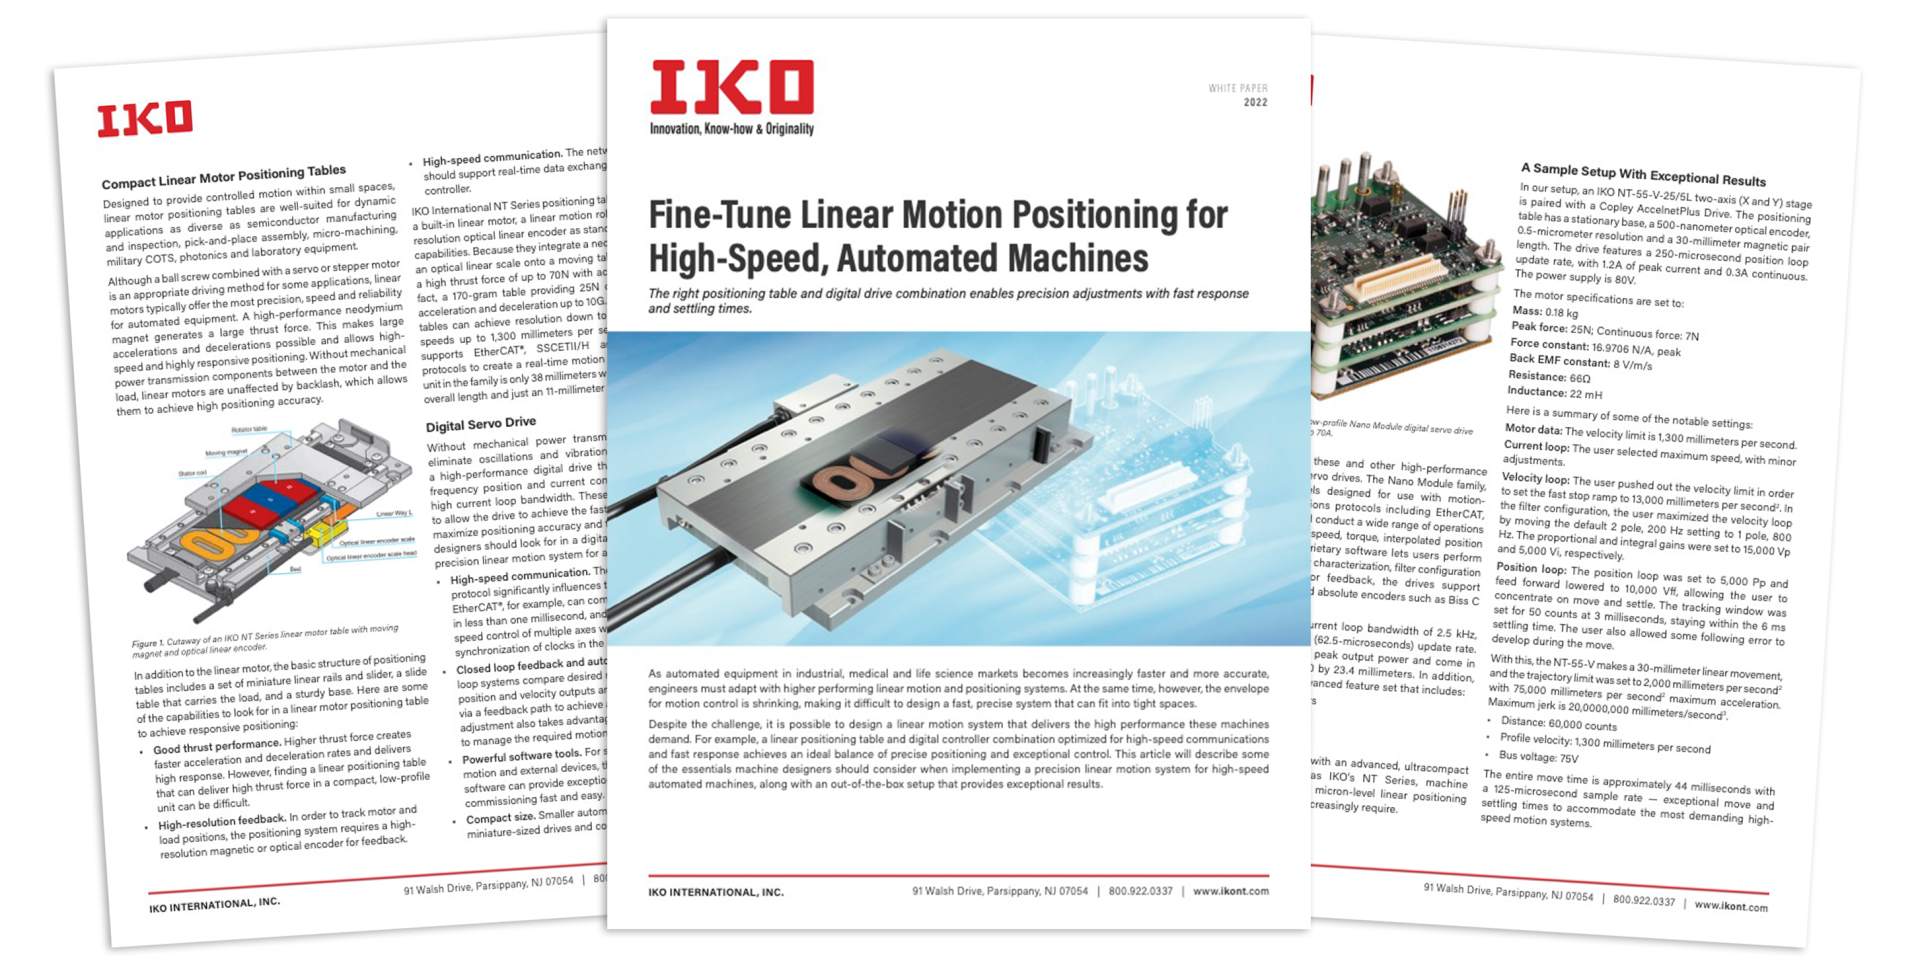 How To Achieve Precise Linear Positioning and Control for Automated Systems